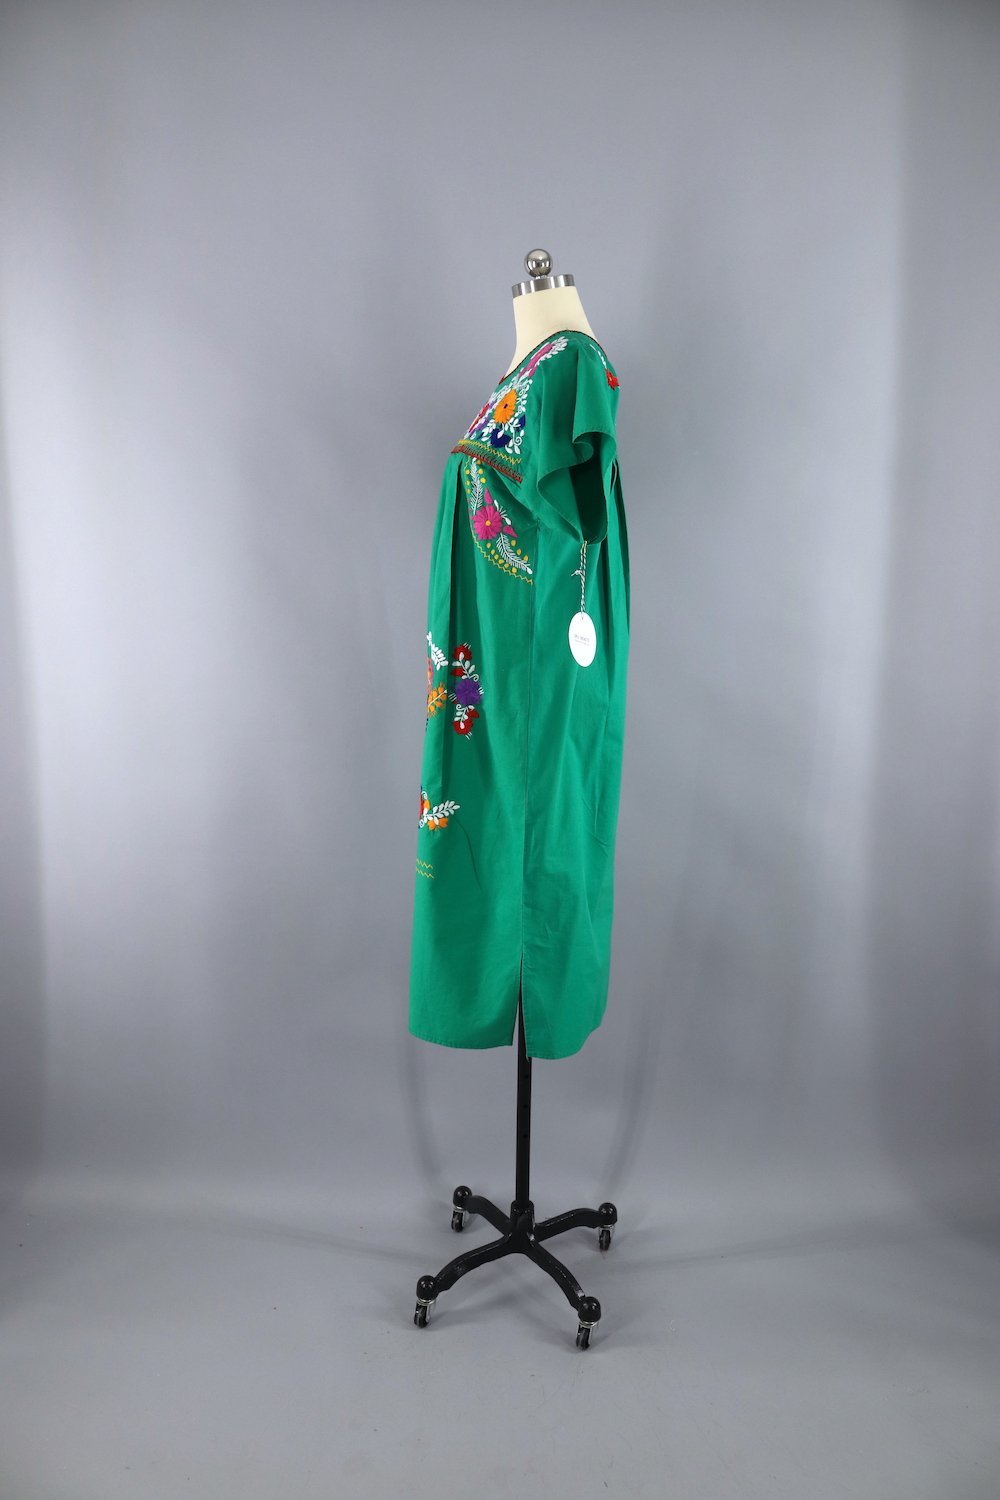 Vintage Mexican Dress / Oaxacan Embroidered Caftan / Green Cotton Huipil - ThisBlueBird